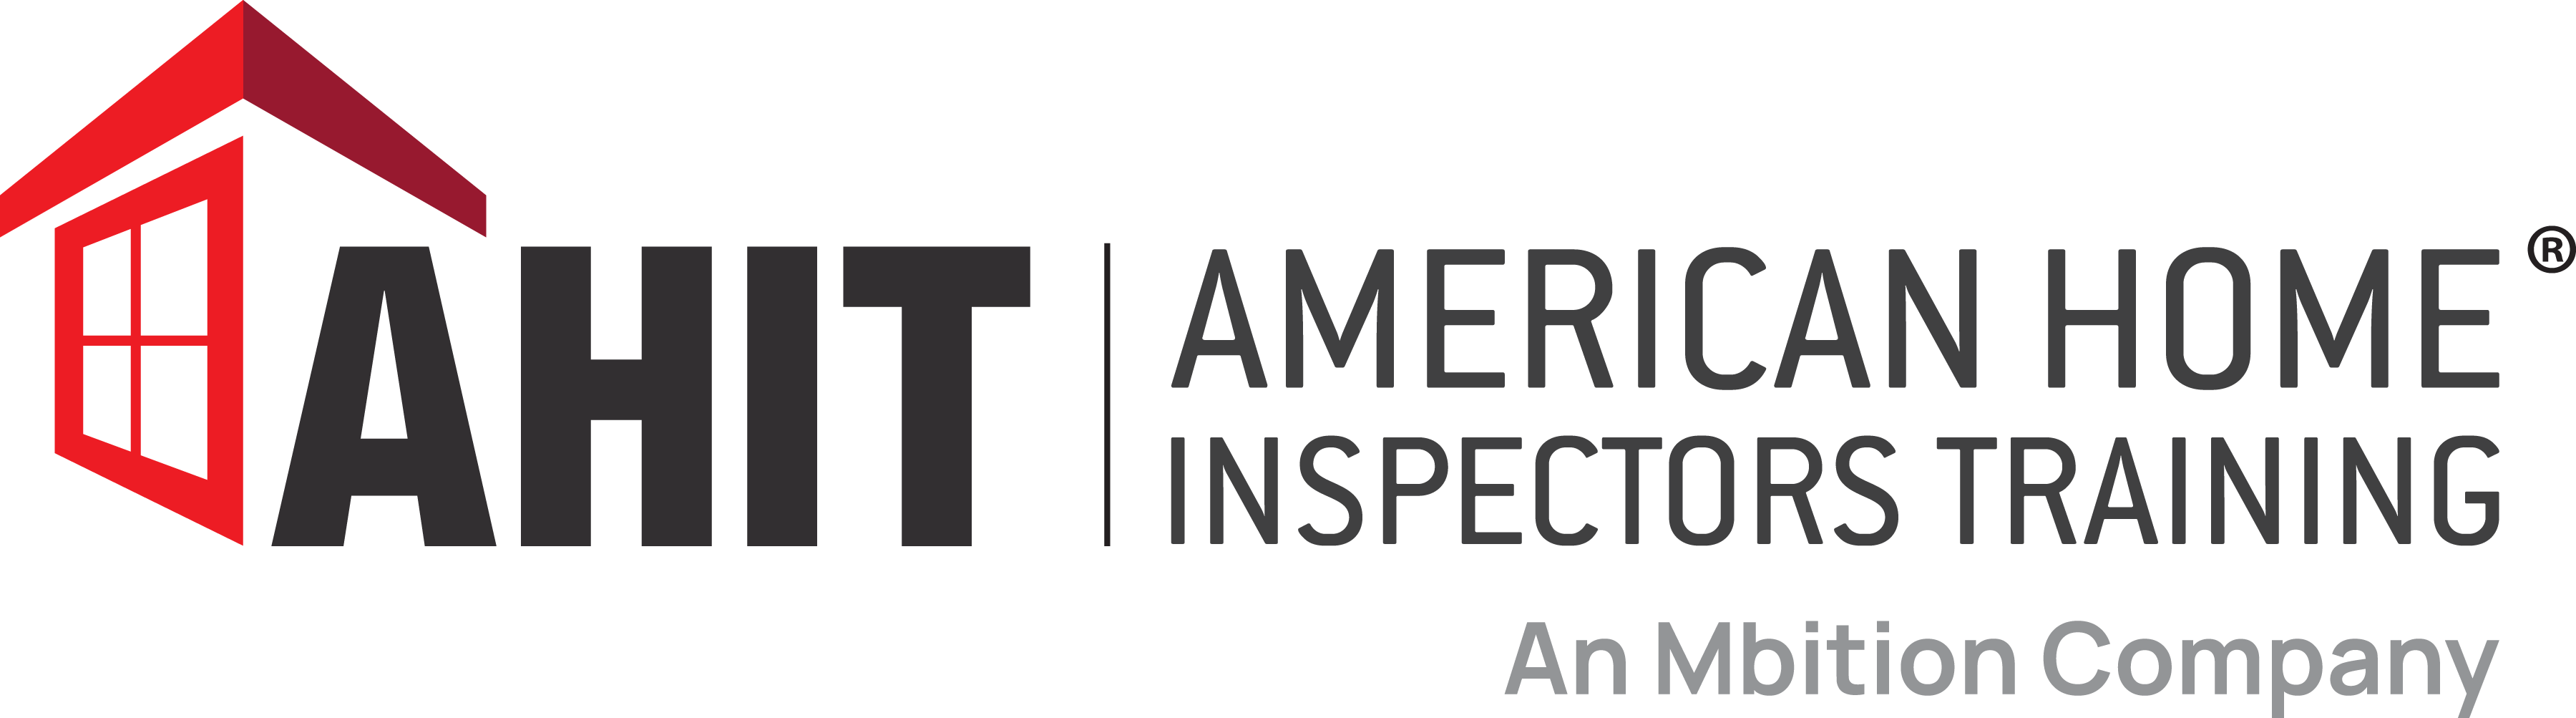 American Home Inspectors Training Ahit School Offers Live Online Classes Software And Reports